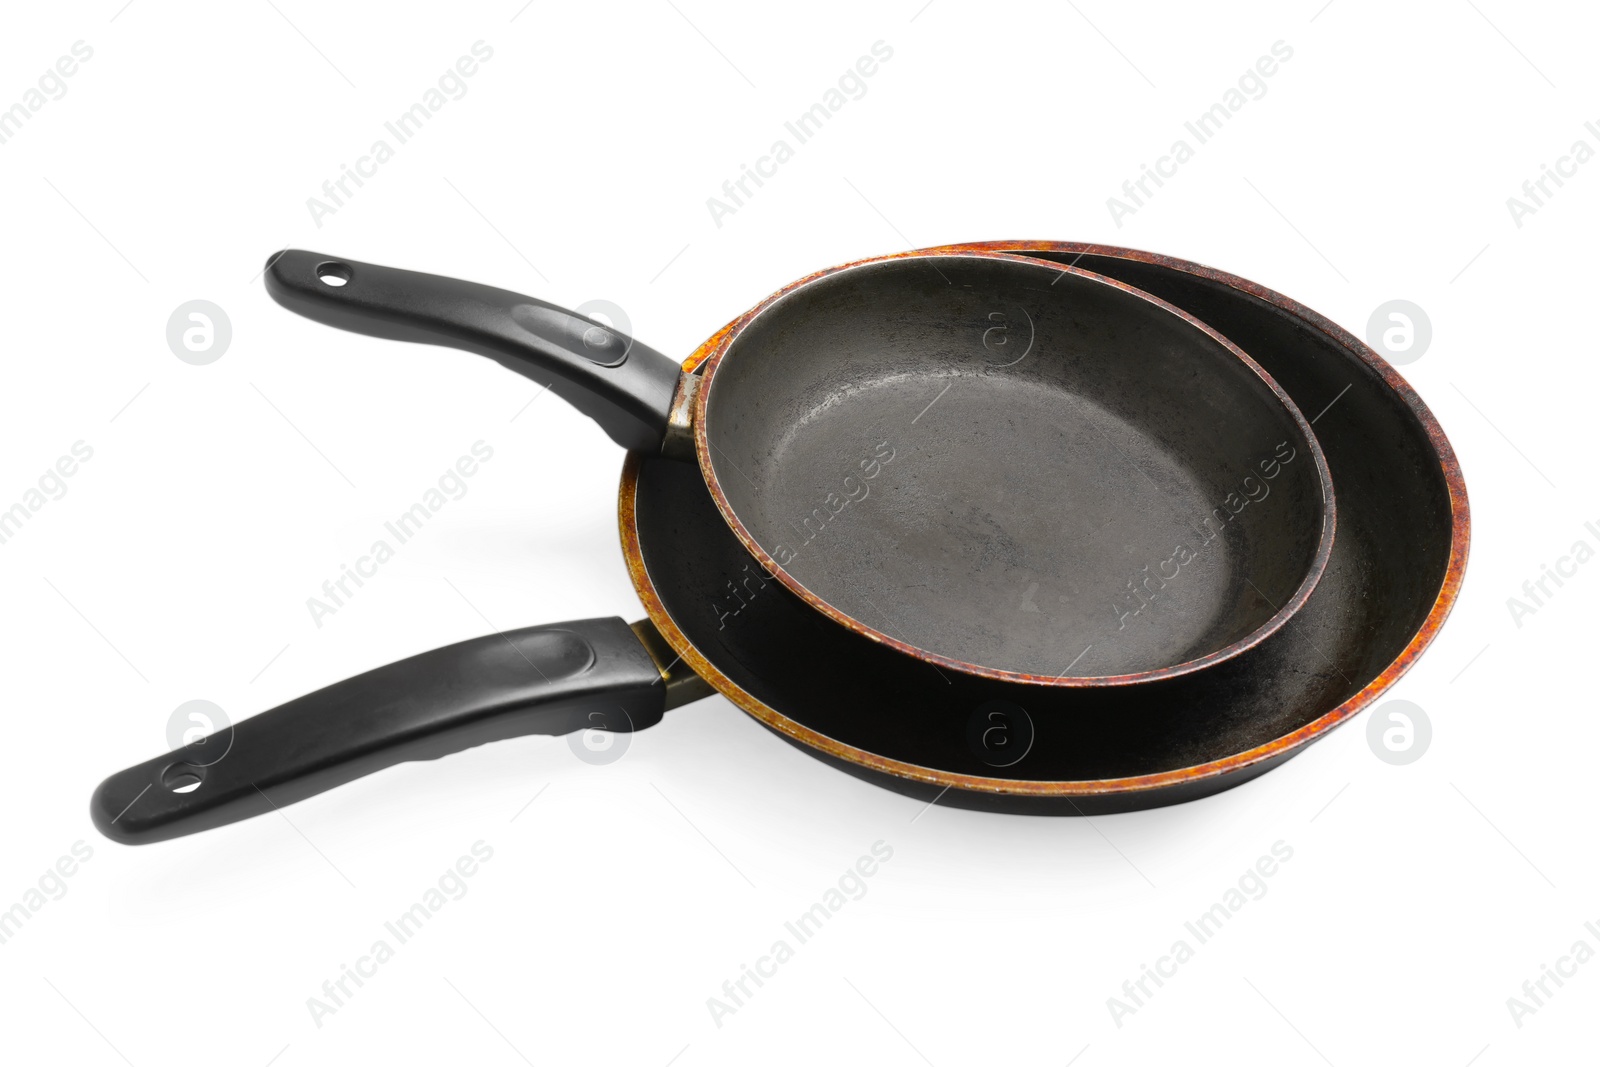 Photo of Dirty old frying pans on white background